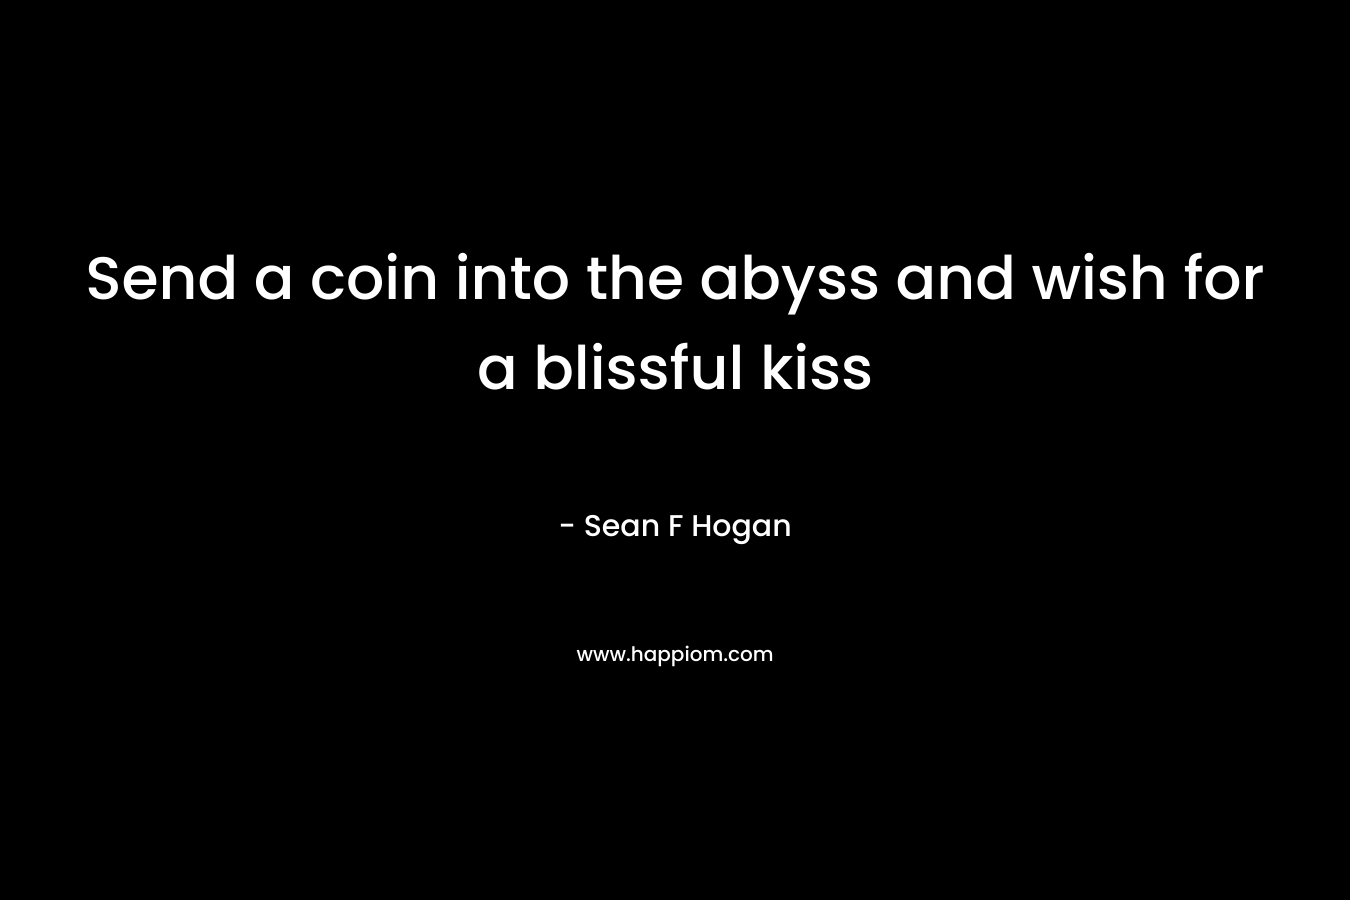 Send a coin into the abyss and wish for a blissful kiss – Sean F Hogan